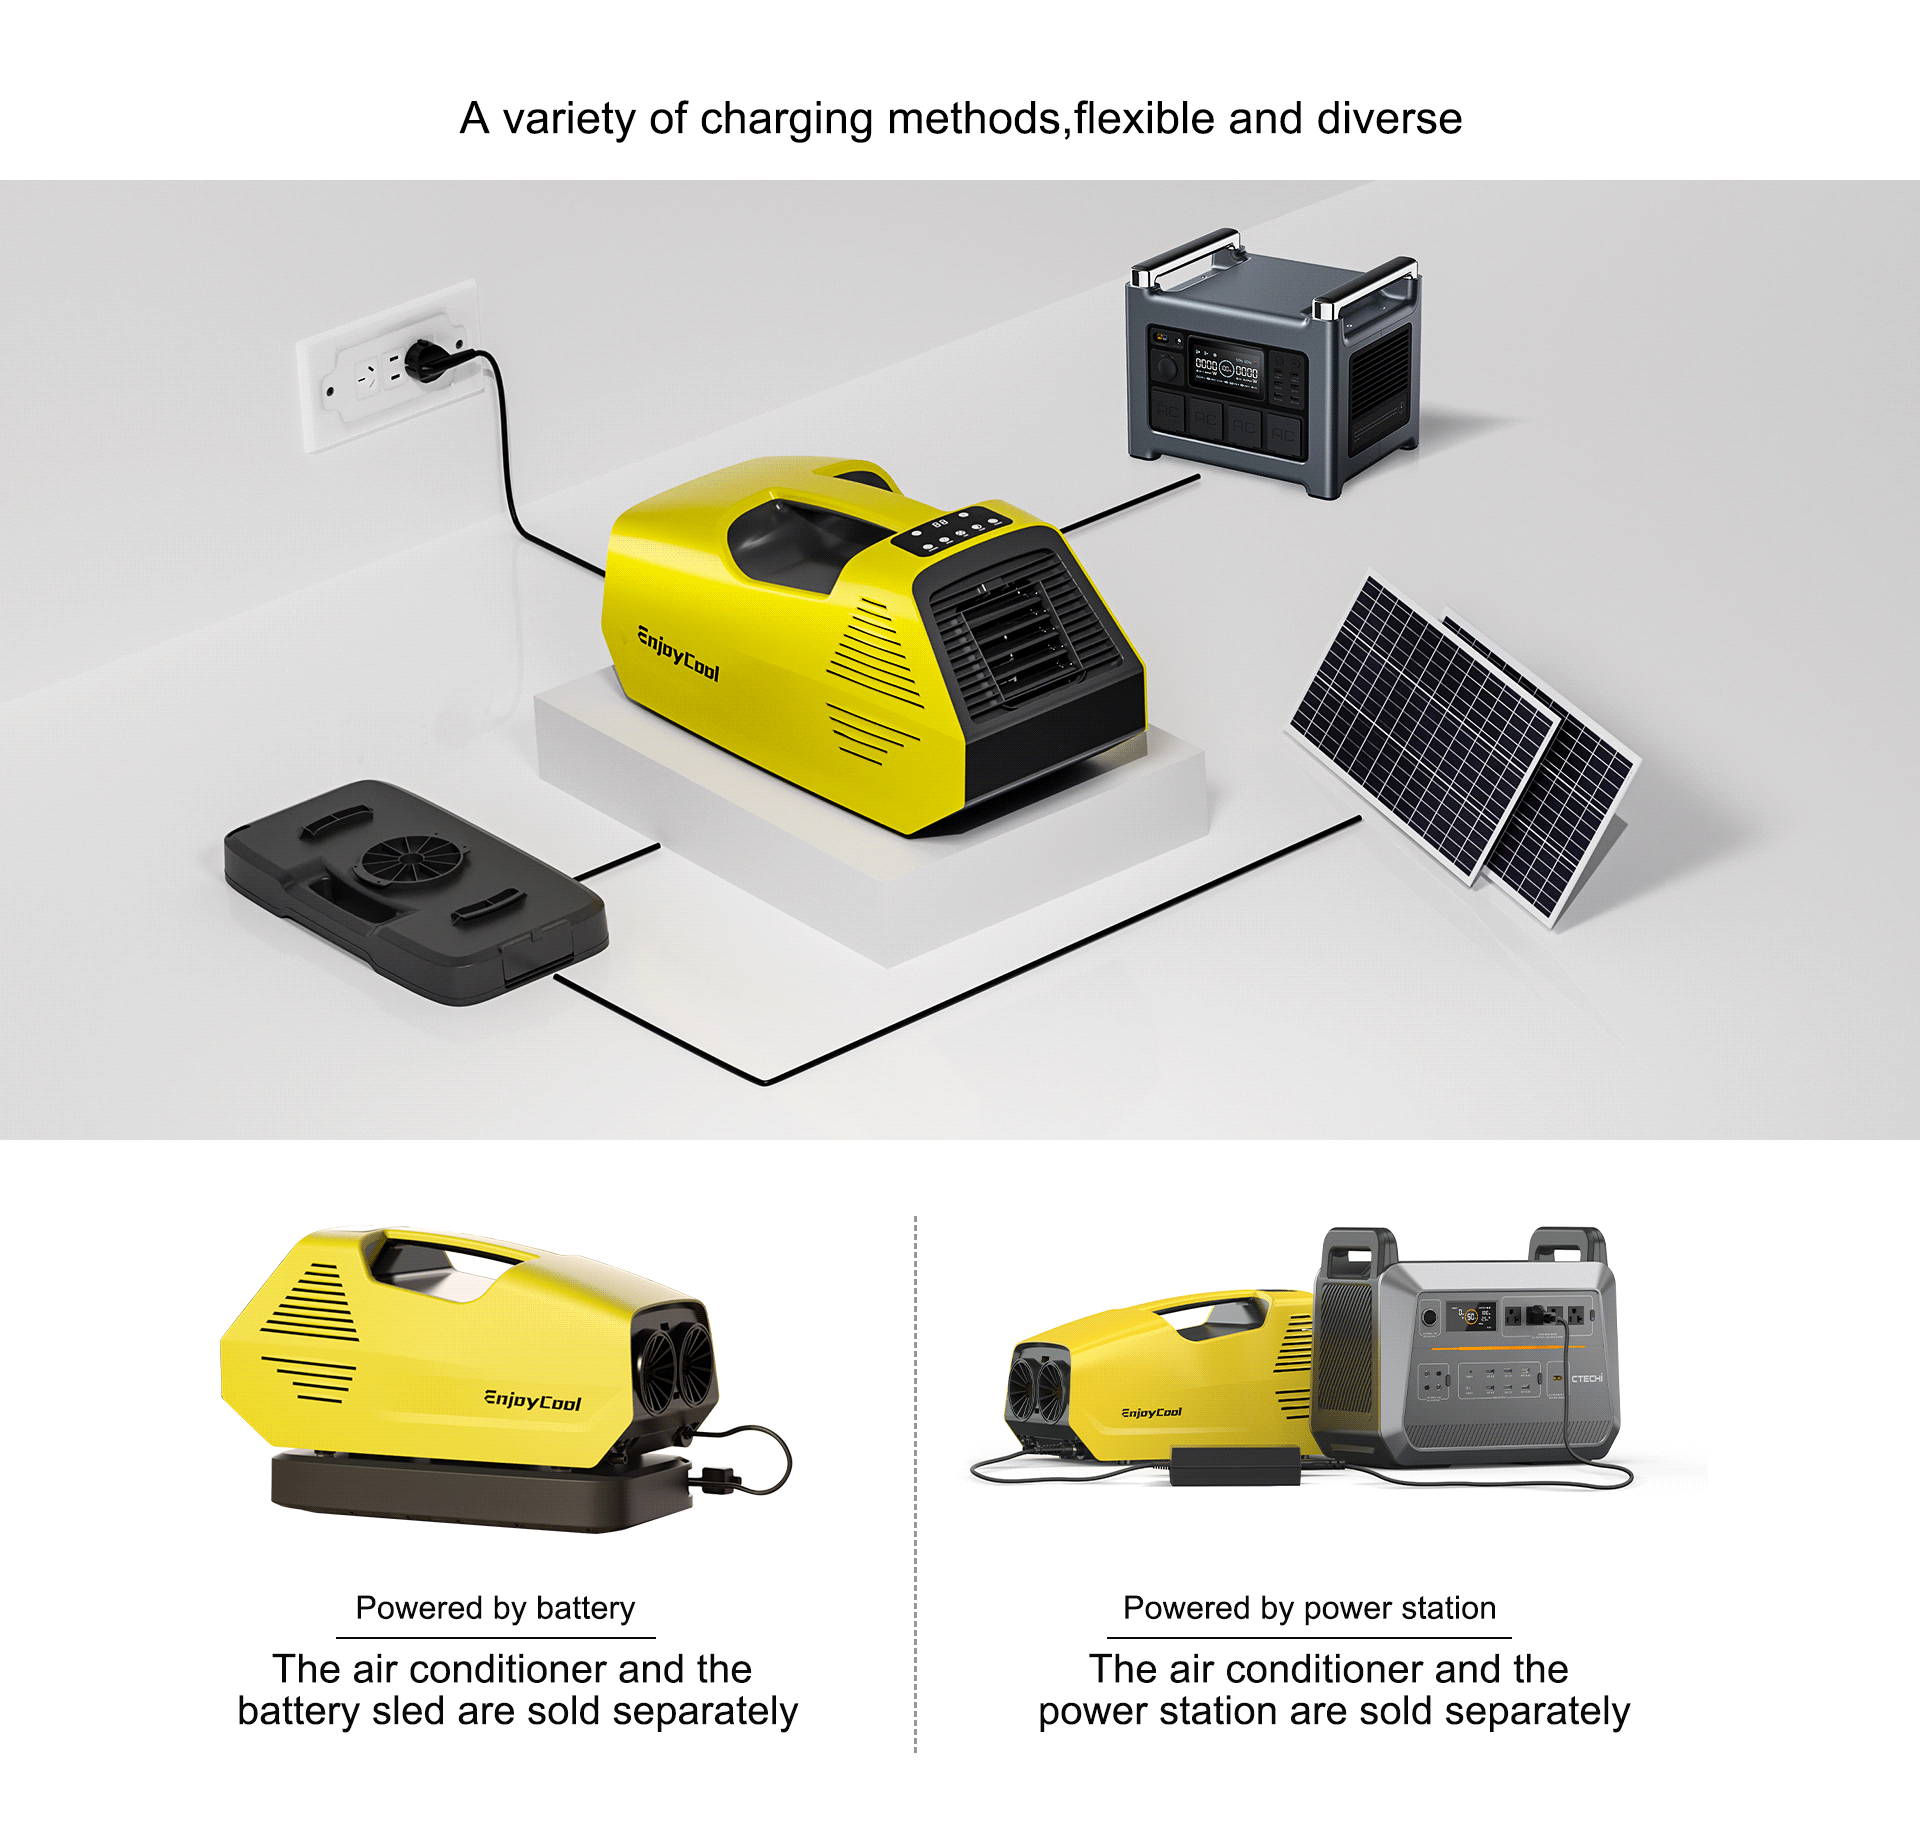 Link2 portable air condioners has a variety of charging methods, which can be charged through energy storage, battery charging, and solar panels.